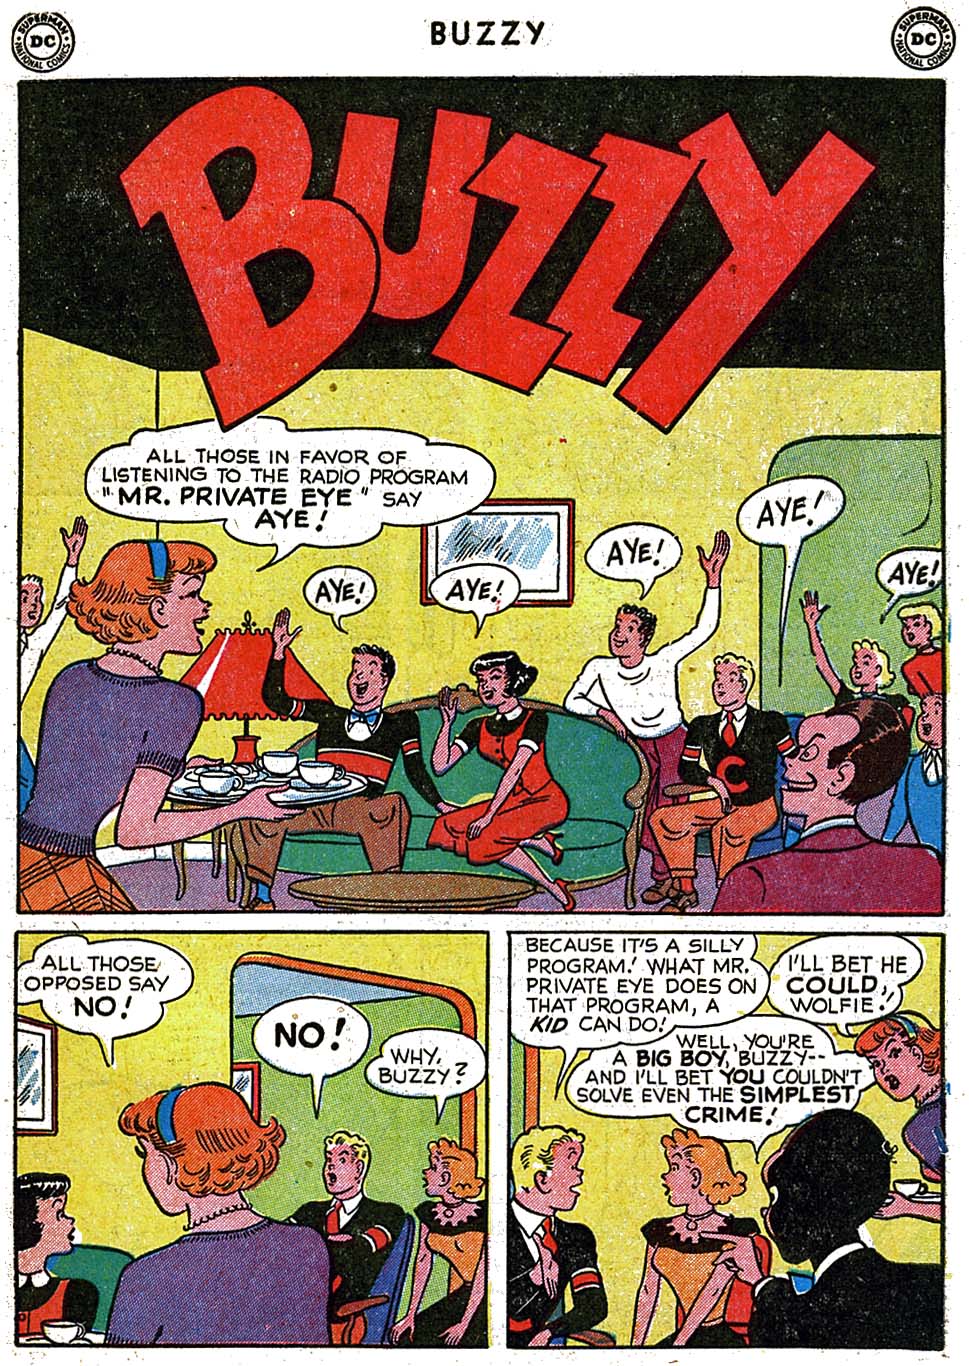 Read online Buzzy comic -  Issue #38 - 3